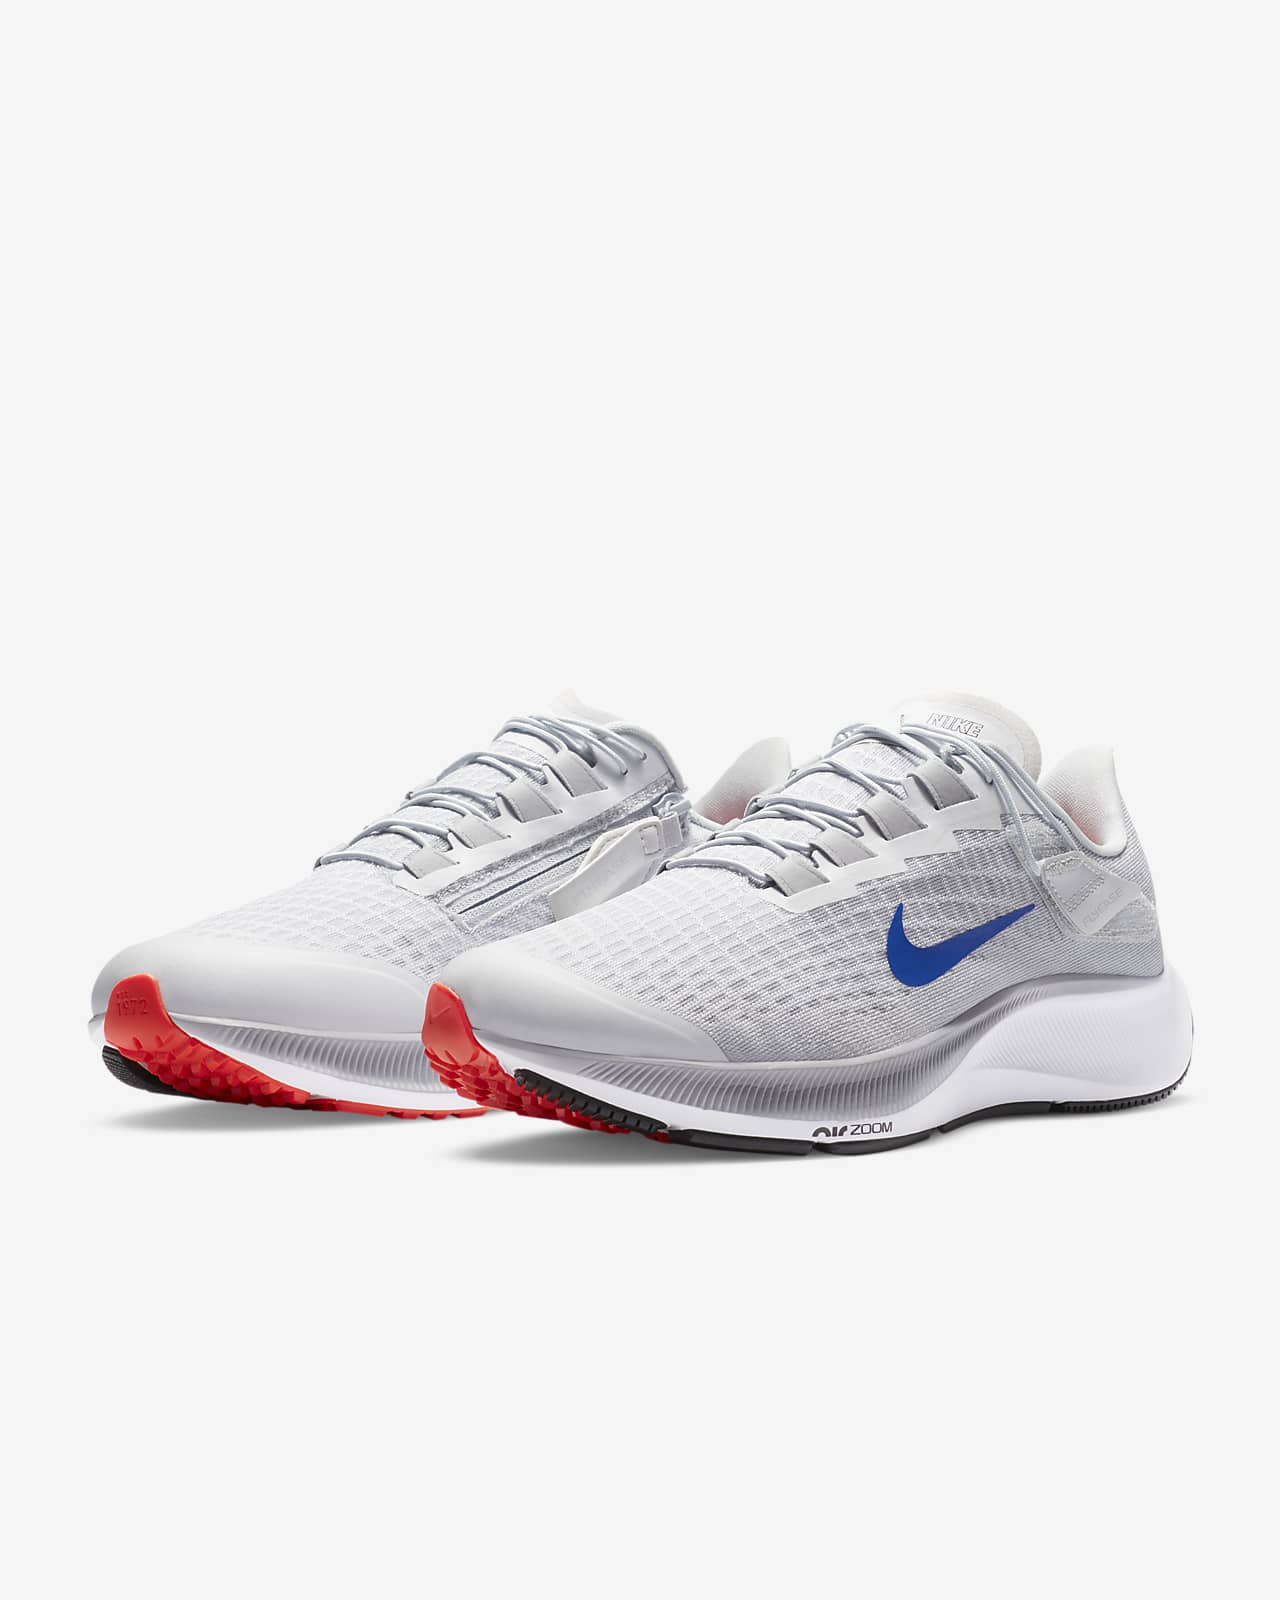 nike extra wide tennis shoes